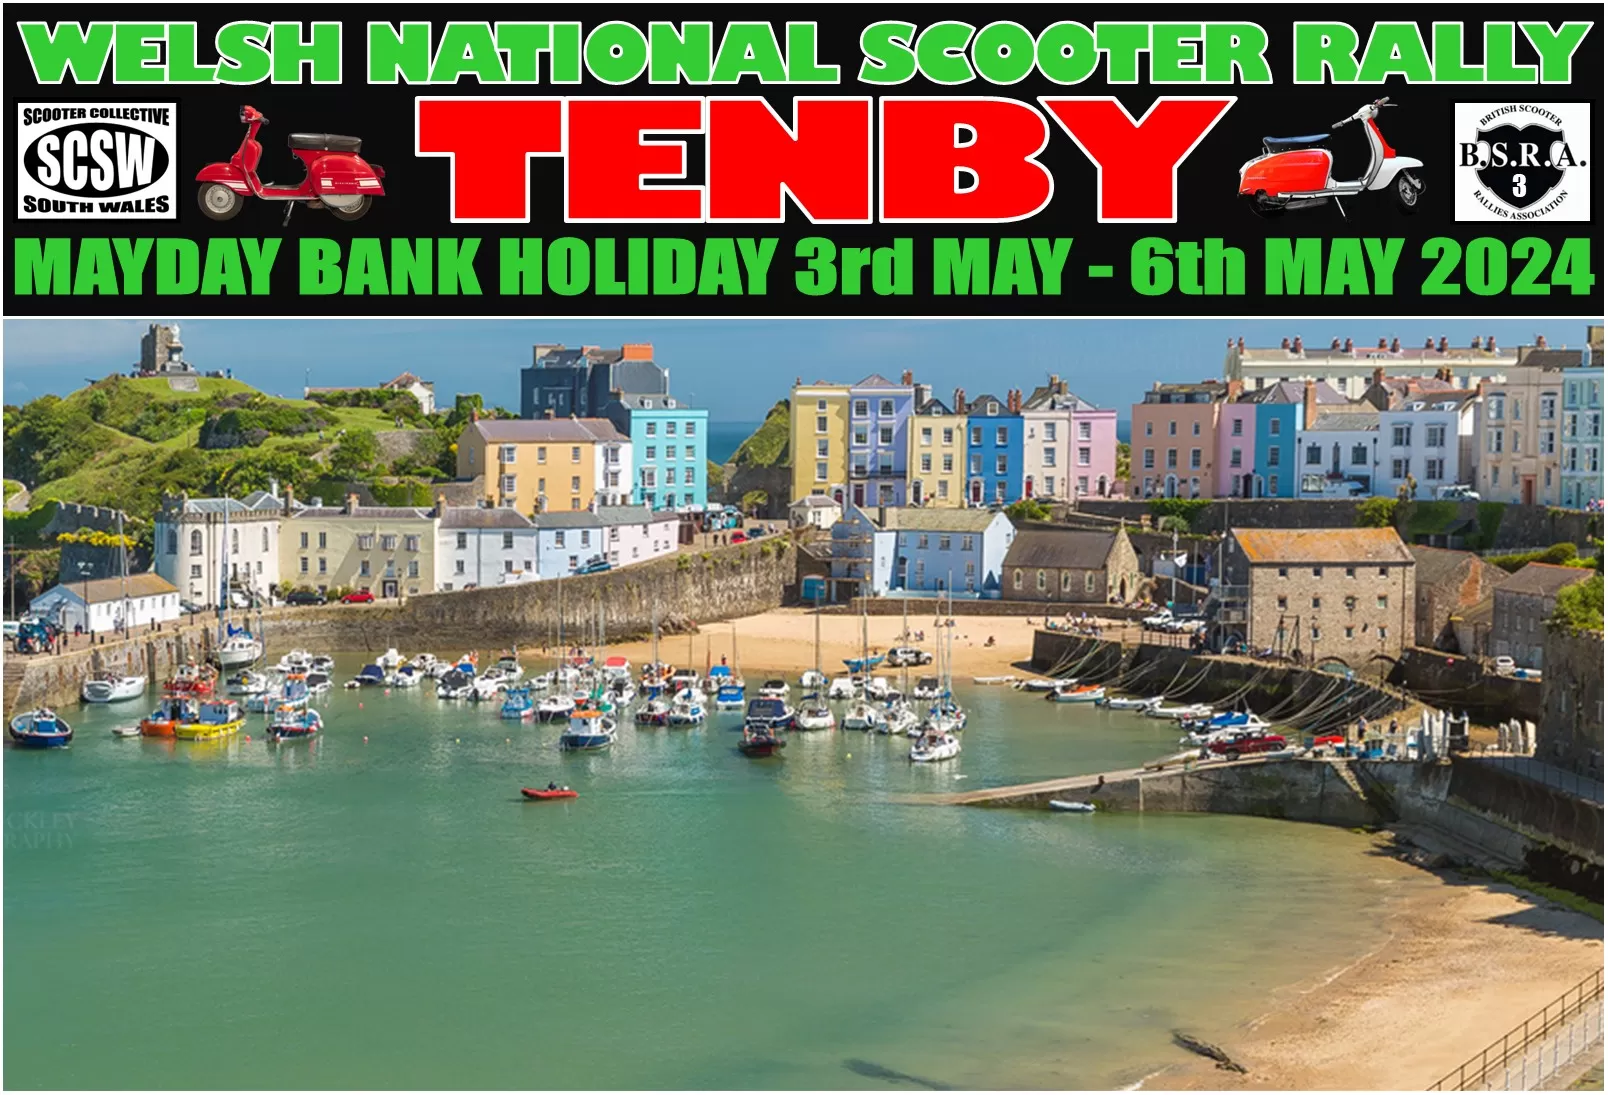 Tenby Scooter Rally